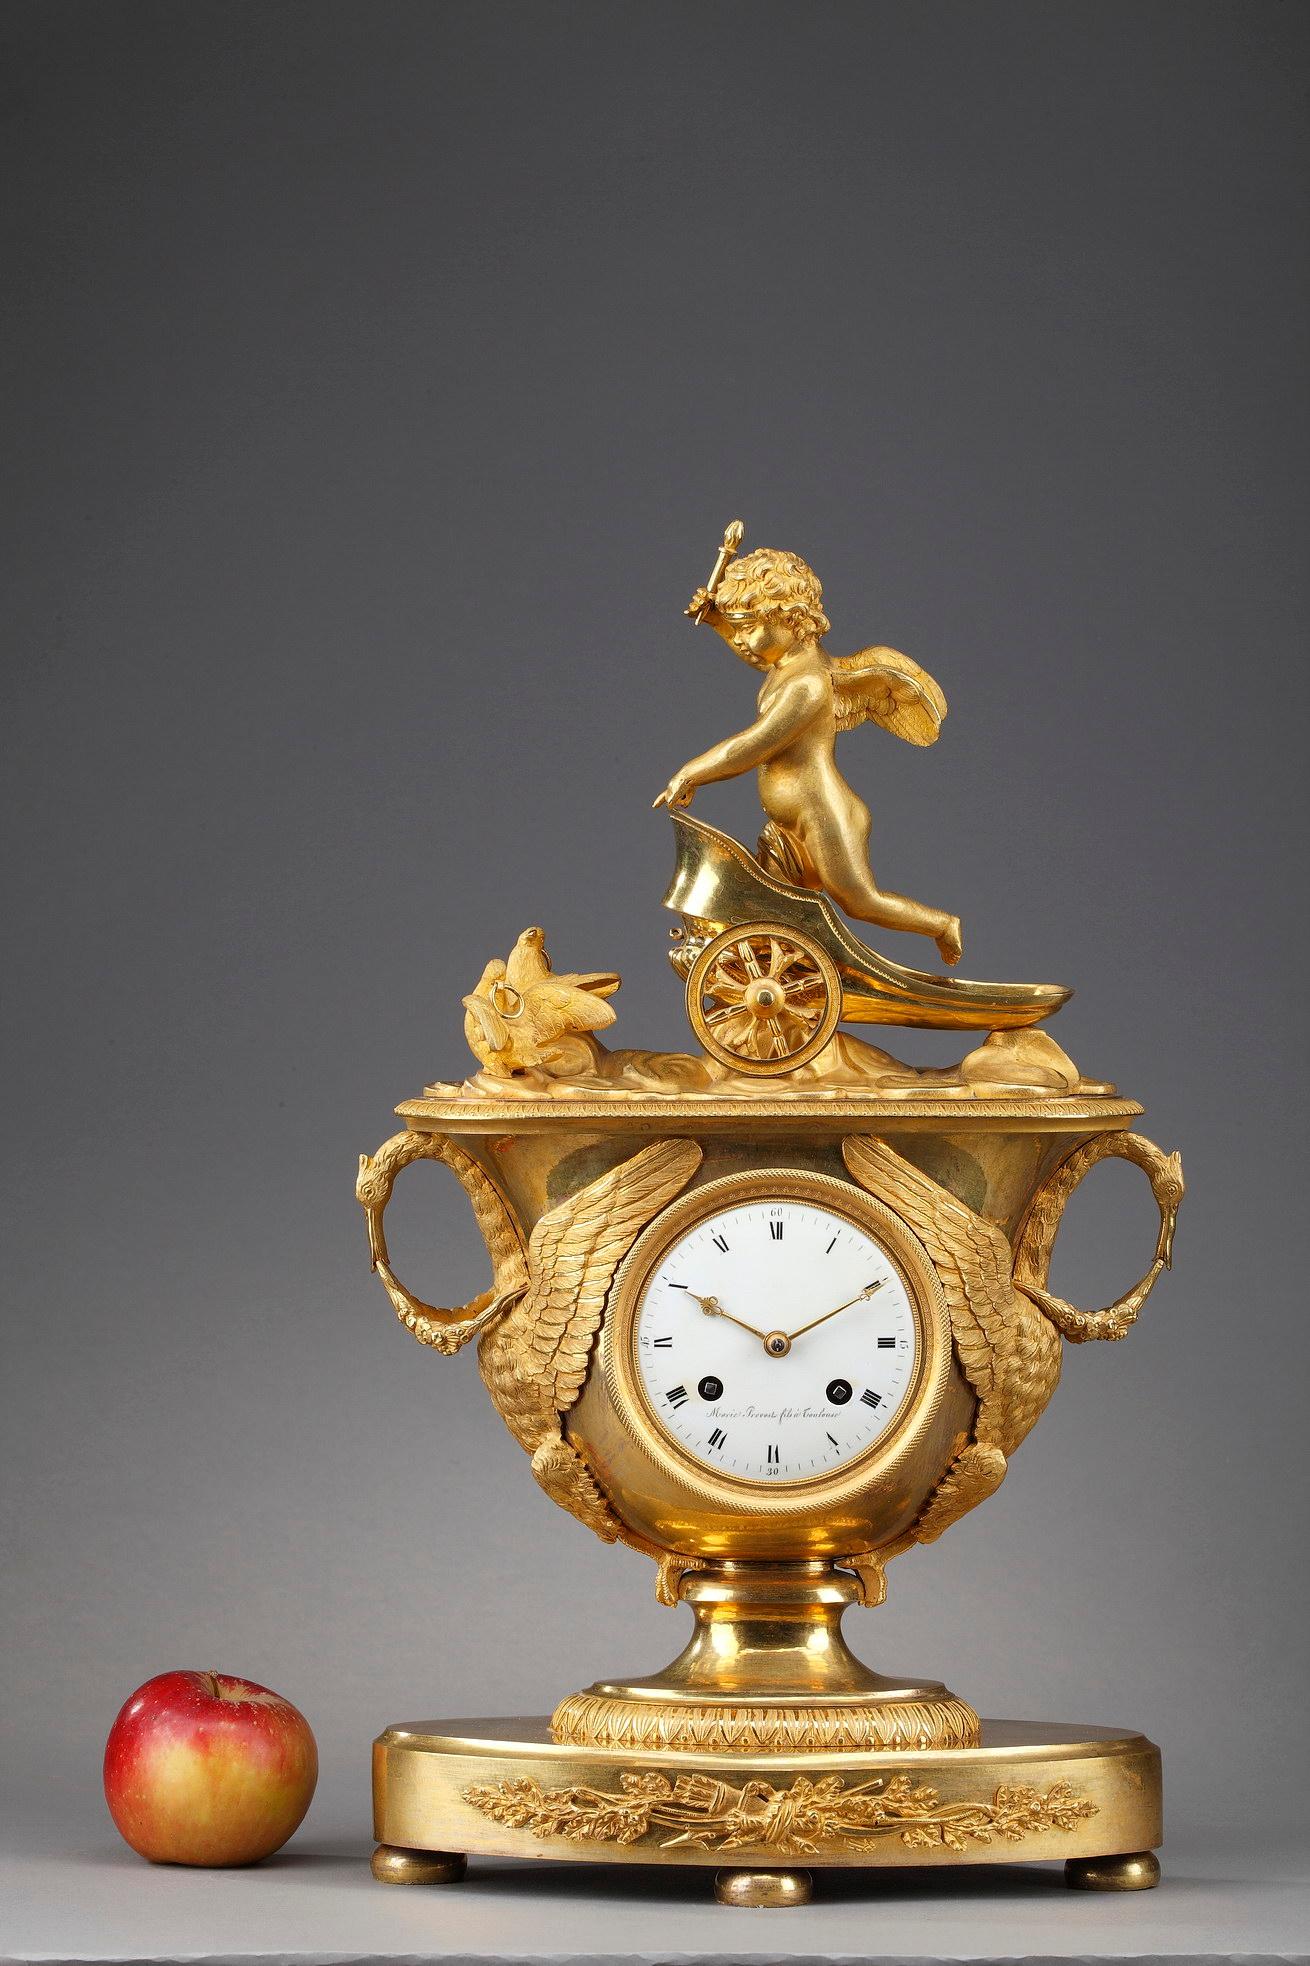 Exceptional gilt bronze mantel clock with its key depicting a winged Cupid in a chariot. The chariot is pulled by two doves that are resting on a platform adorned with water-leaf. The body of the clock is shaped like a vase, which contains the white